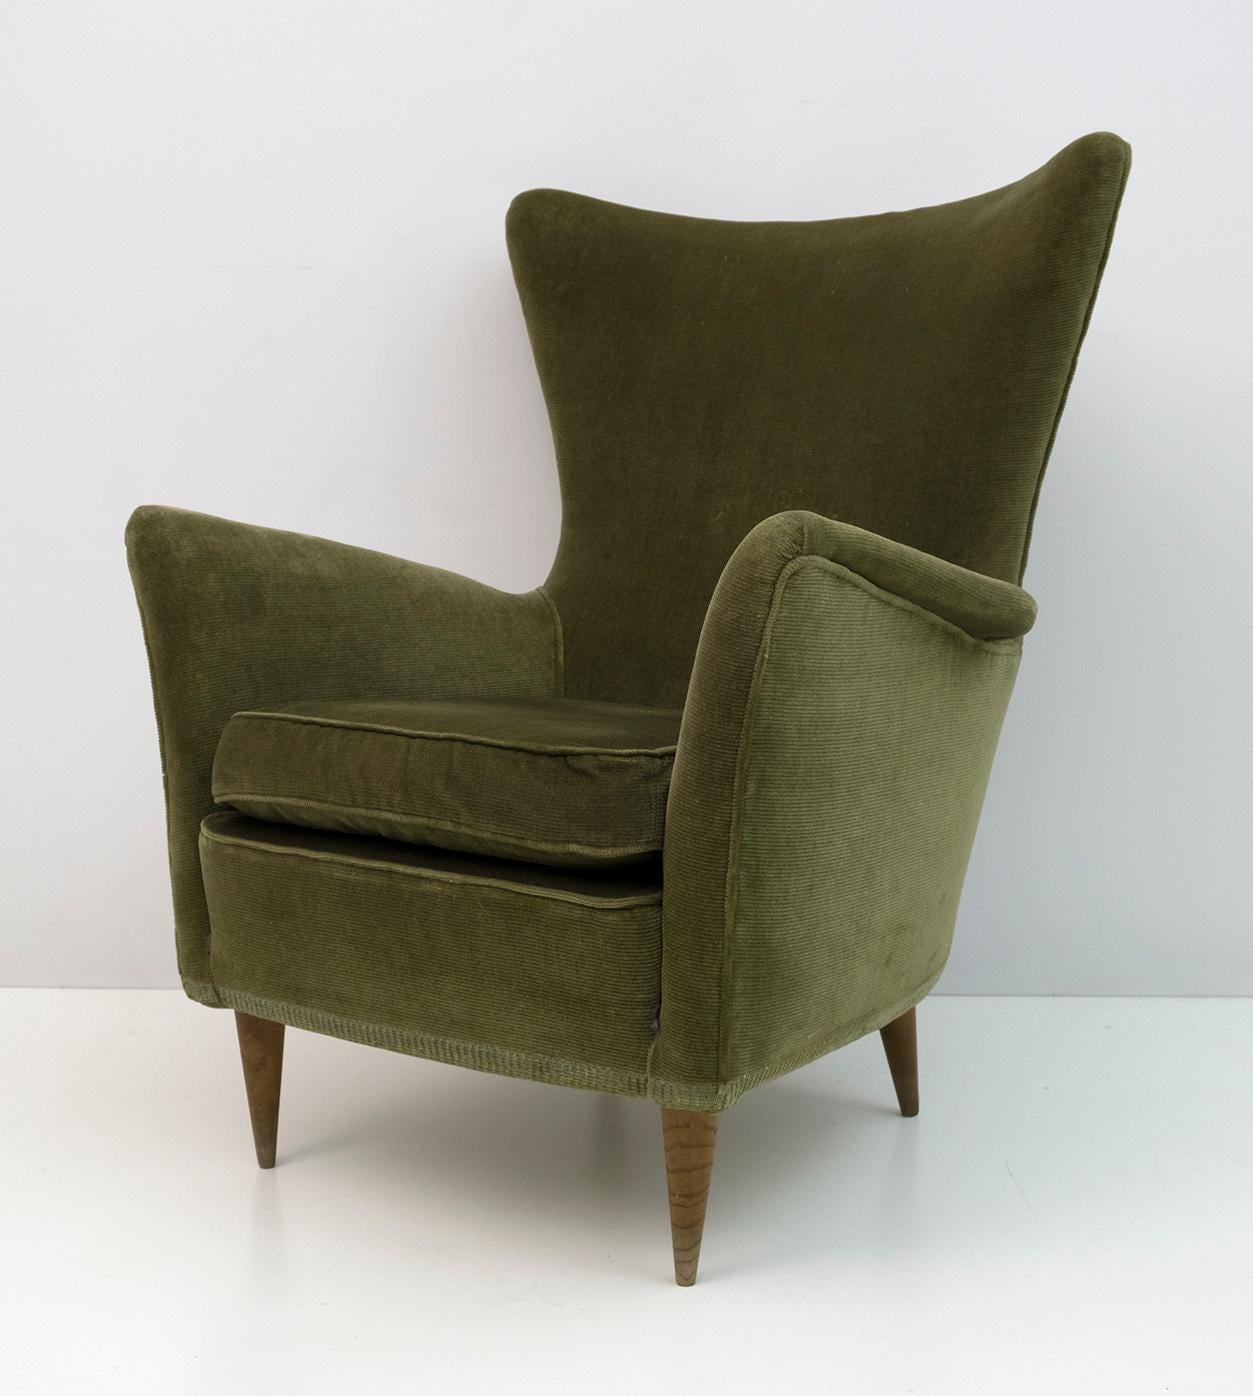 To keep in mind: luxurious Art Deco style armchair designed by Gio Ponti for Hotel Bristol Merano Italy.
Lounge armchair with low armrests with a sculptural shape.
Made in Italy in the early 1950s
The velvet is worn and stained, some upholstery